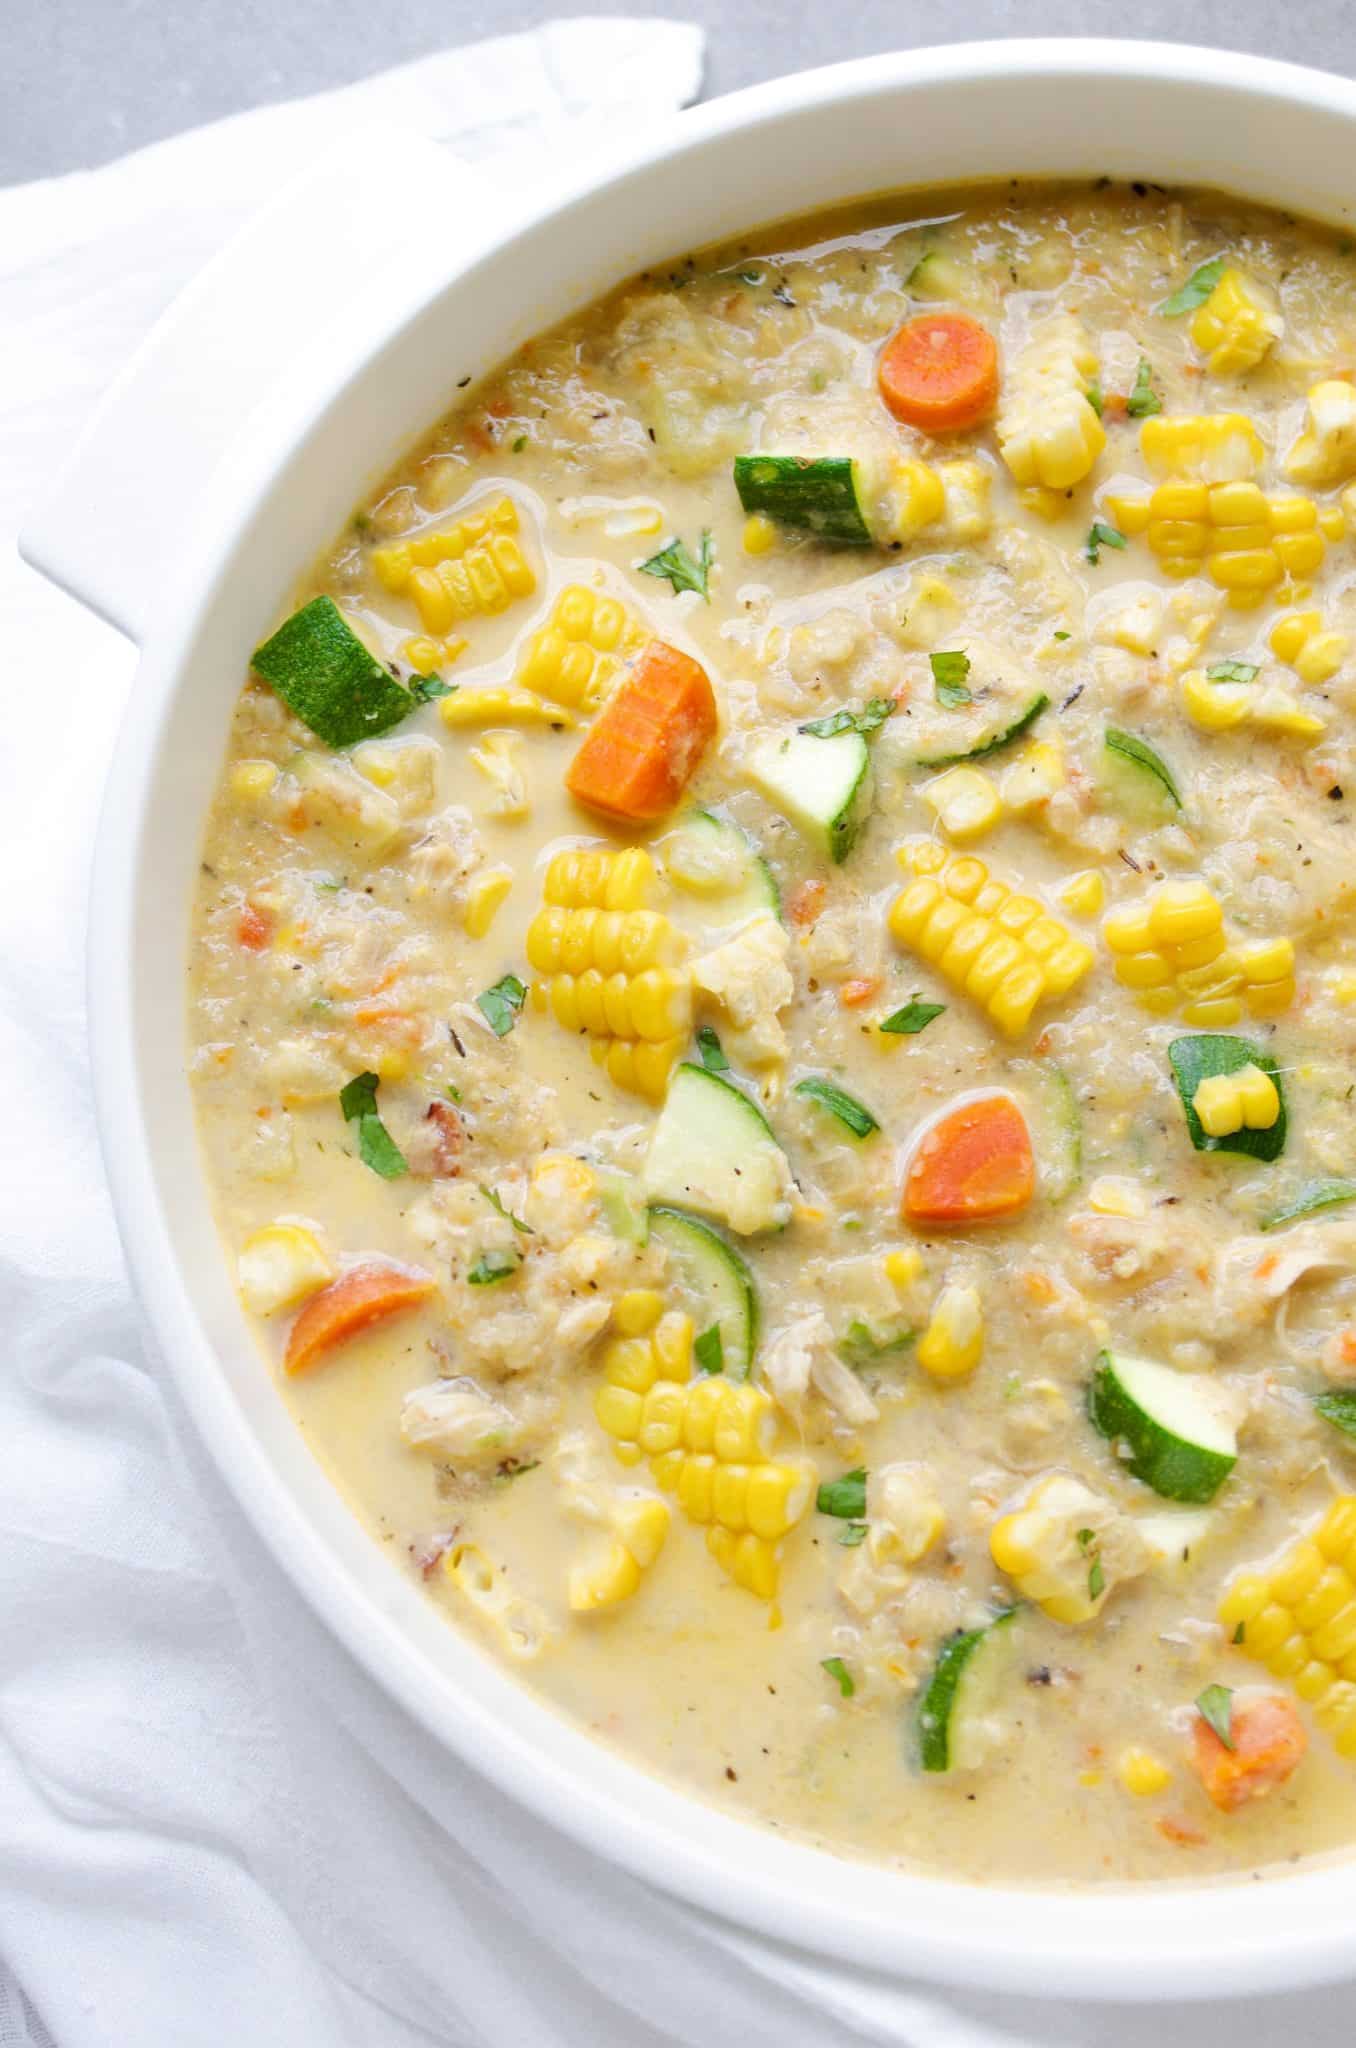 Corn and Zucchini Chowder - The Forked Spoon